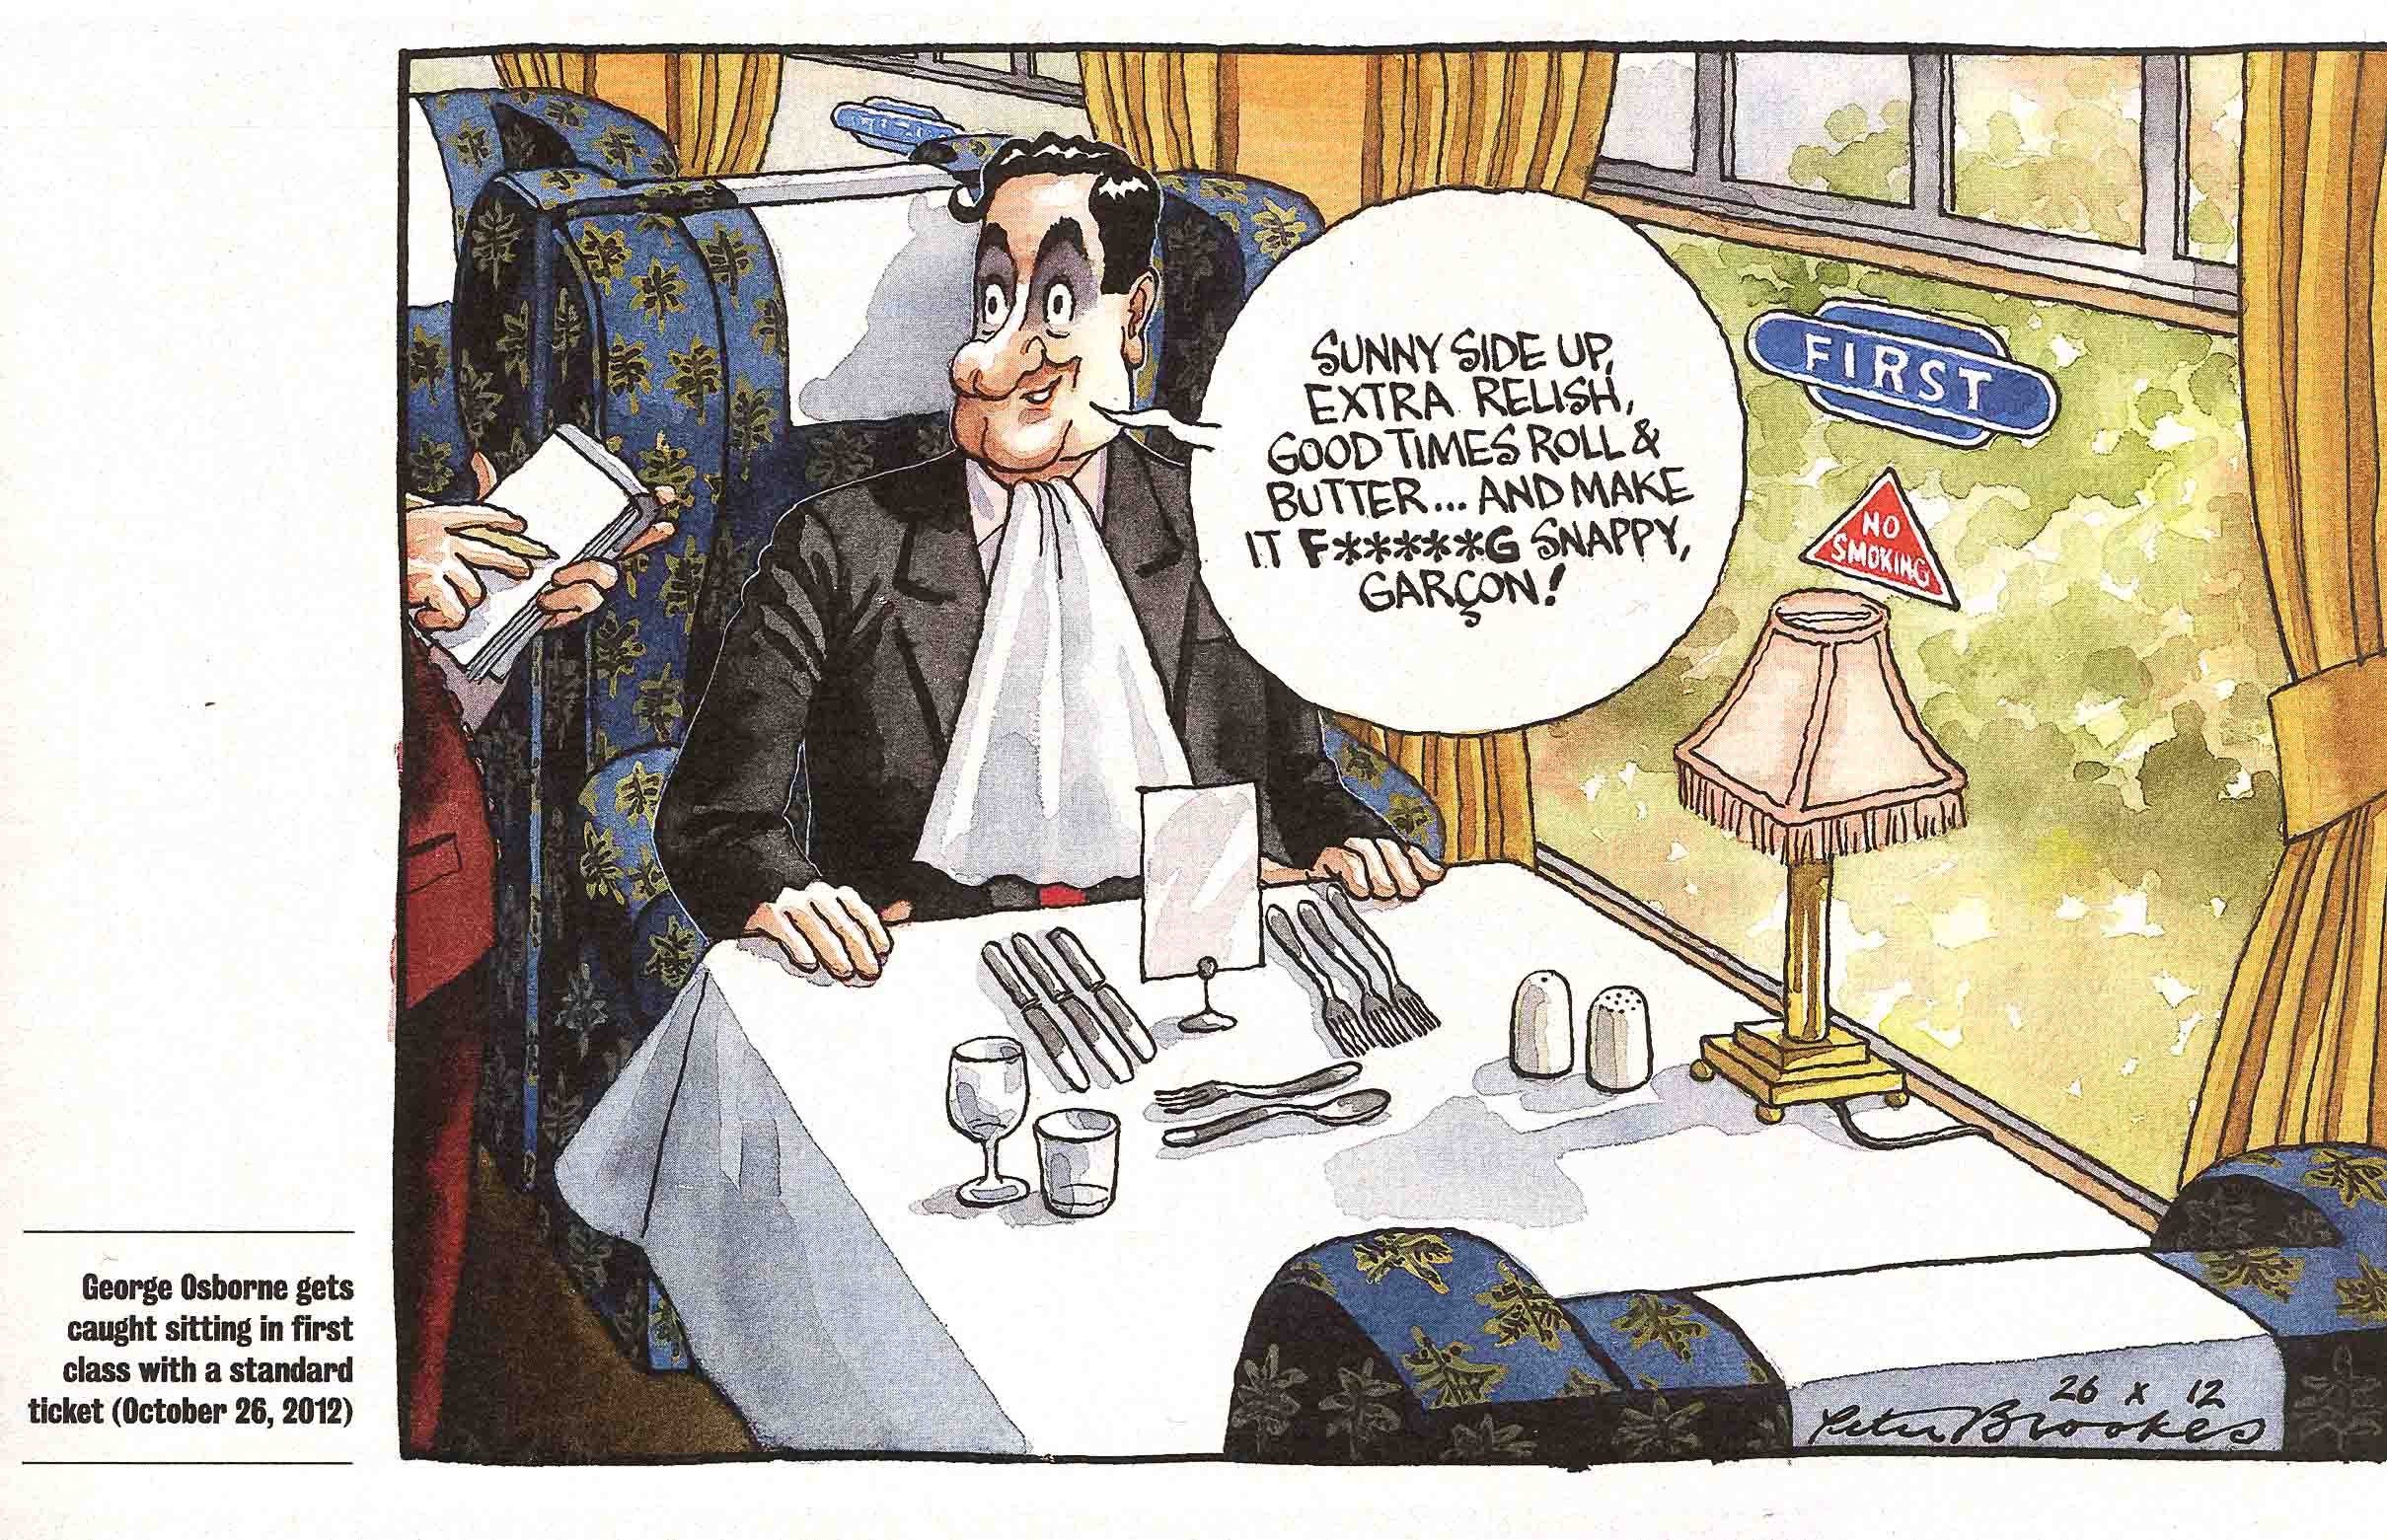 The Fare dodging Chancellor #GeorgeOsborne #VirginTrains #Tory #Conservatives Peter Brookes